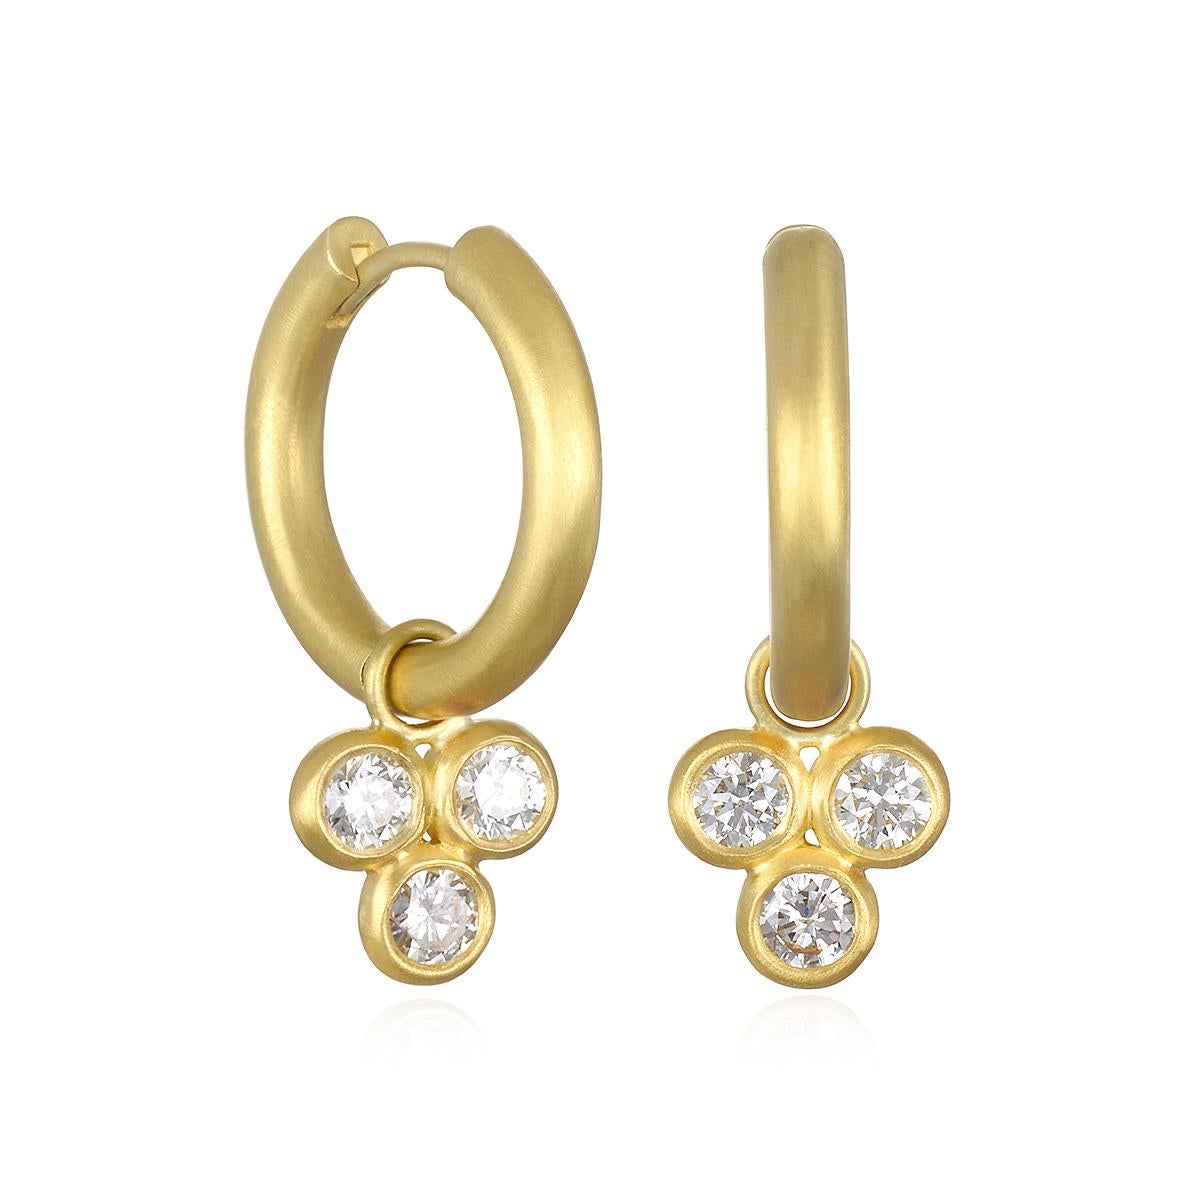 Faye Kim 18 Karat Gold Micro Pave Hoops with Detachable Triple Diamond Earring Drops - Perfect for every style and occasion!
Hoops: 
Inner Diameter .5